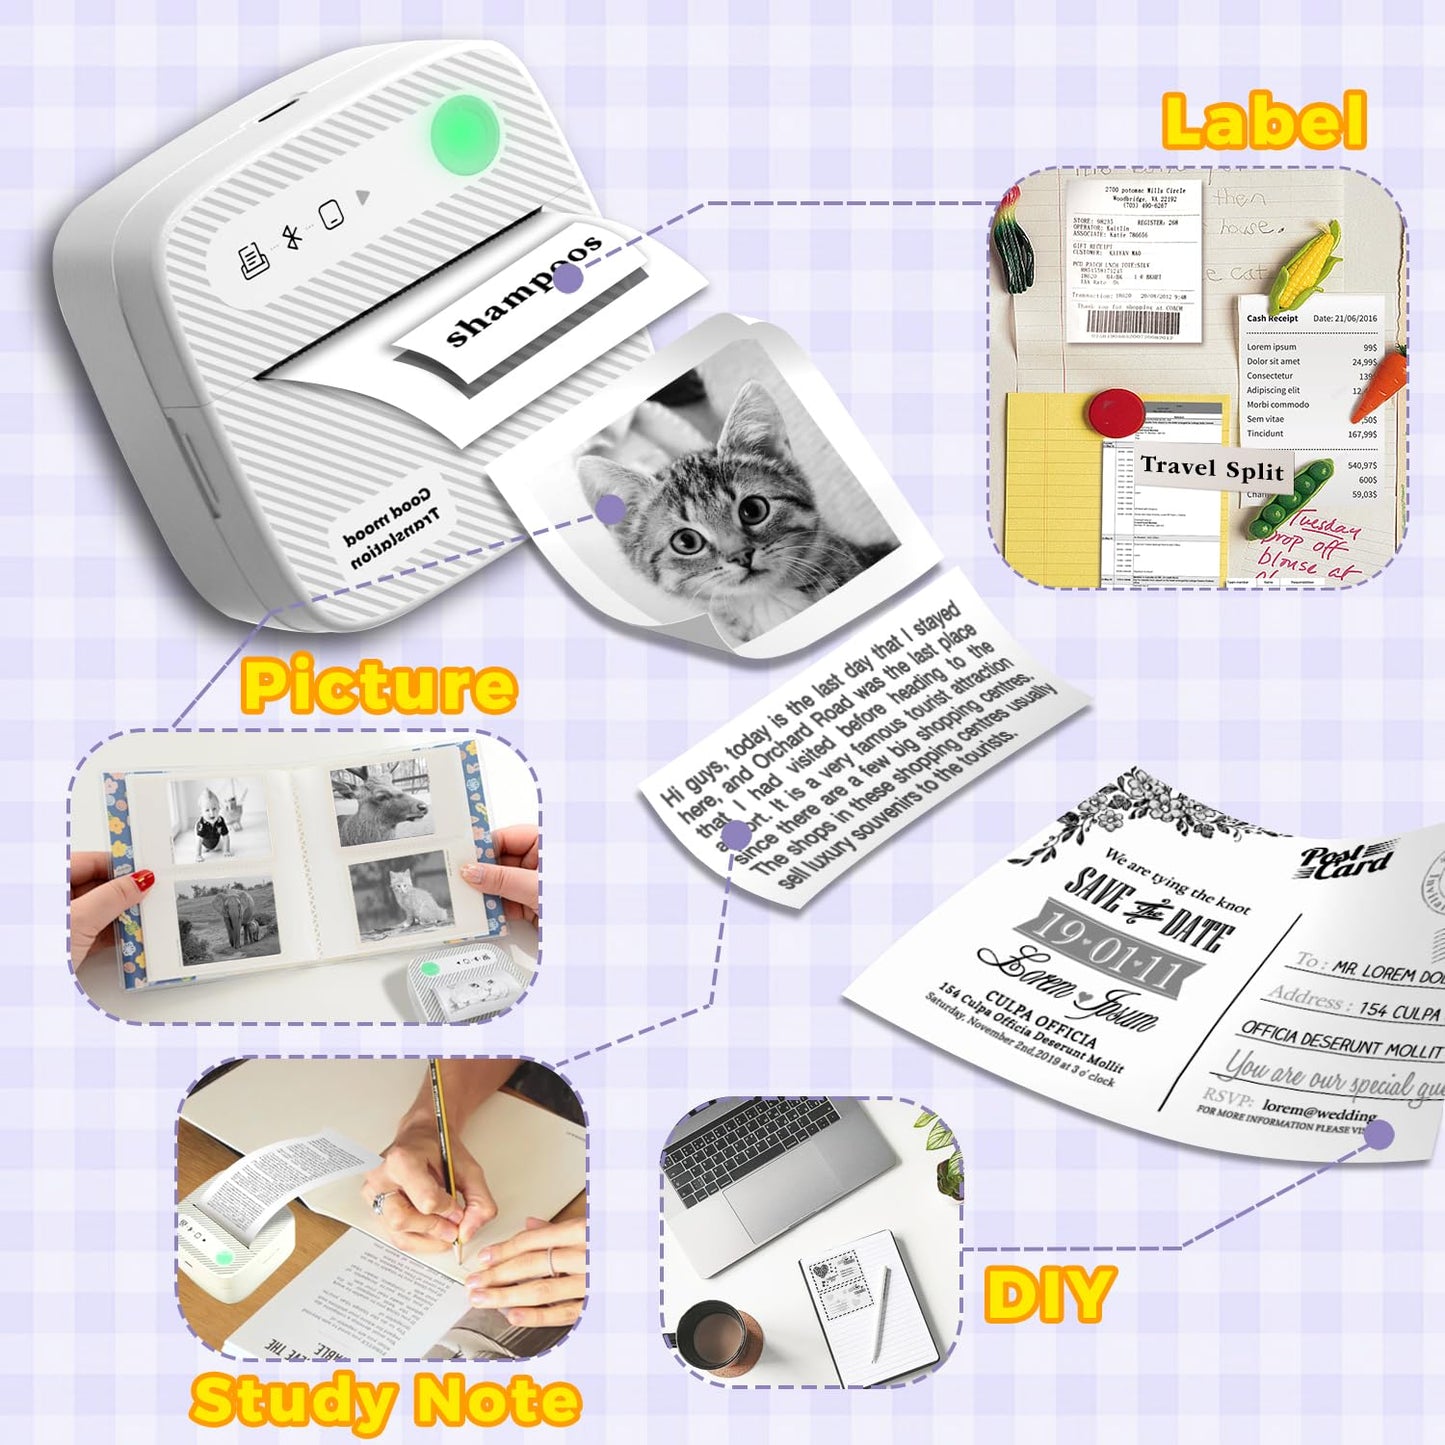 Mini Printer with 7 Rolls Sticker Paper, Receipt Sticker Printer Efficiently and Quickly, Receipt Printer for Study Notes, Pictures, DIY, Label, Free App with Multiple Templates-Printer-01